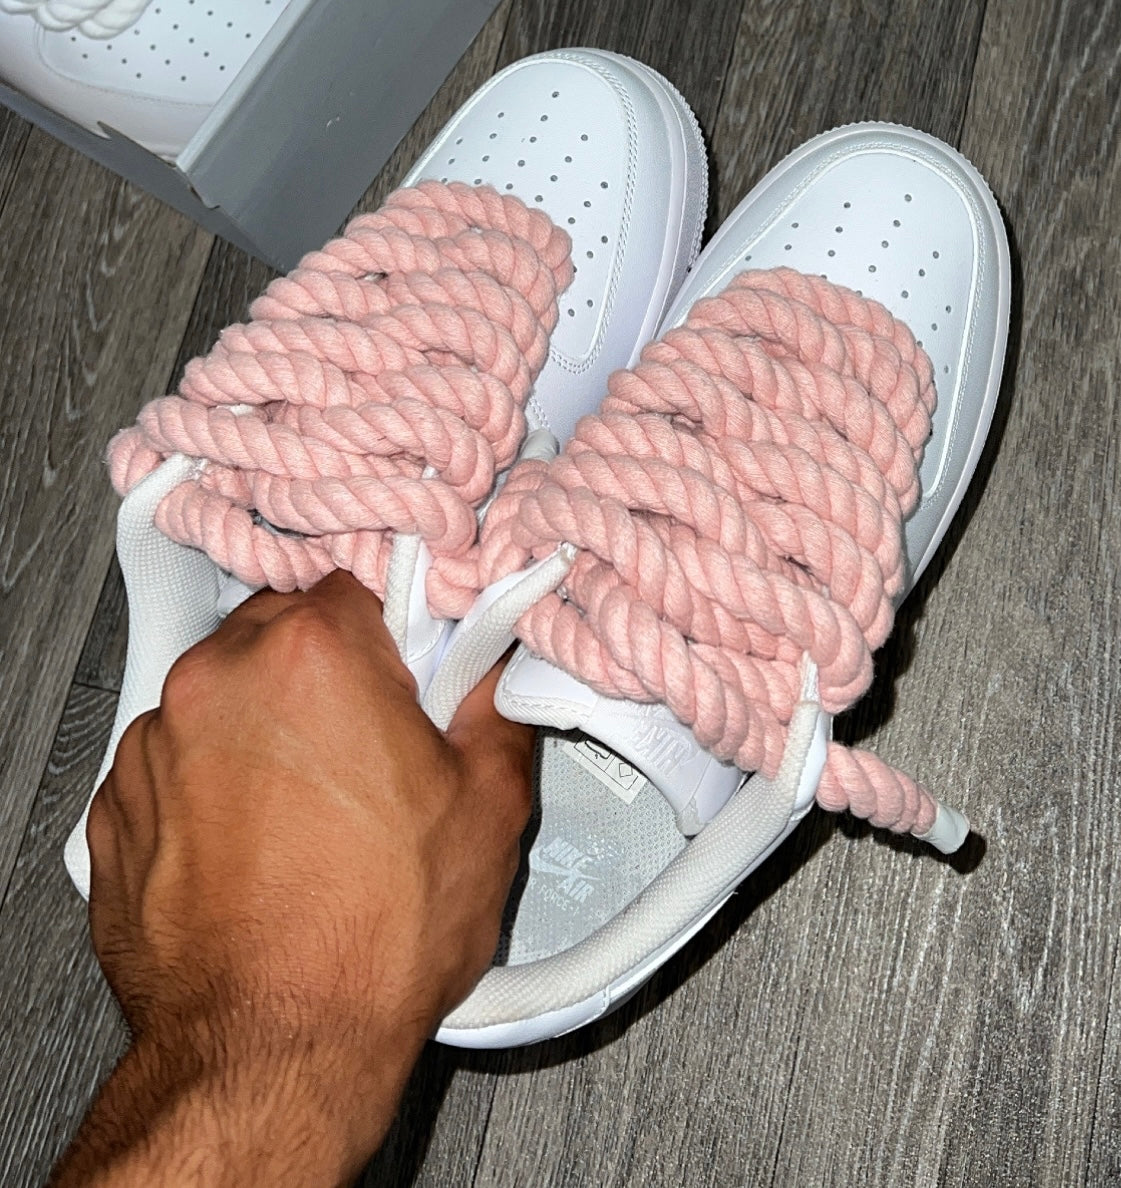 airforce 1 rope laces pink